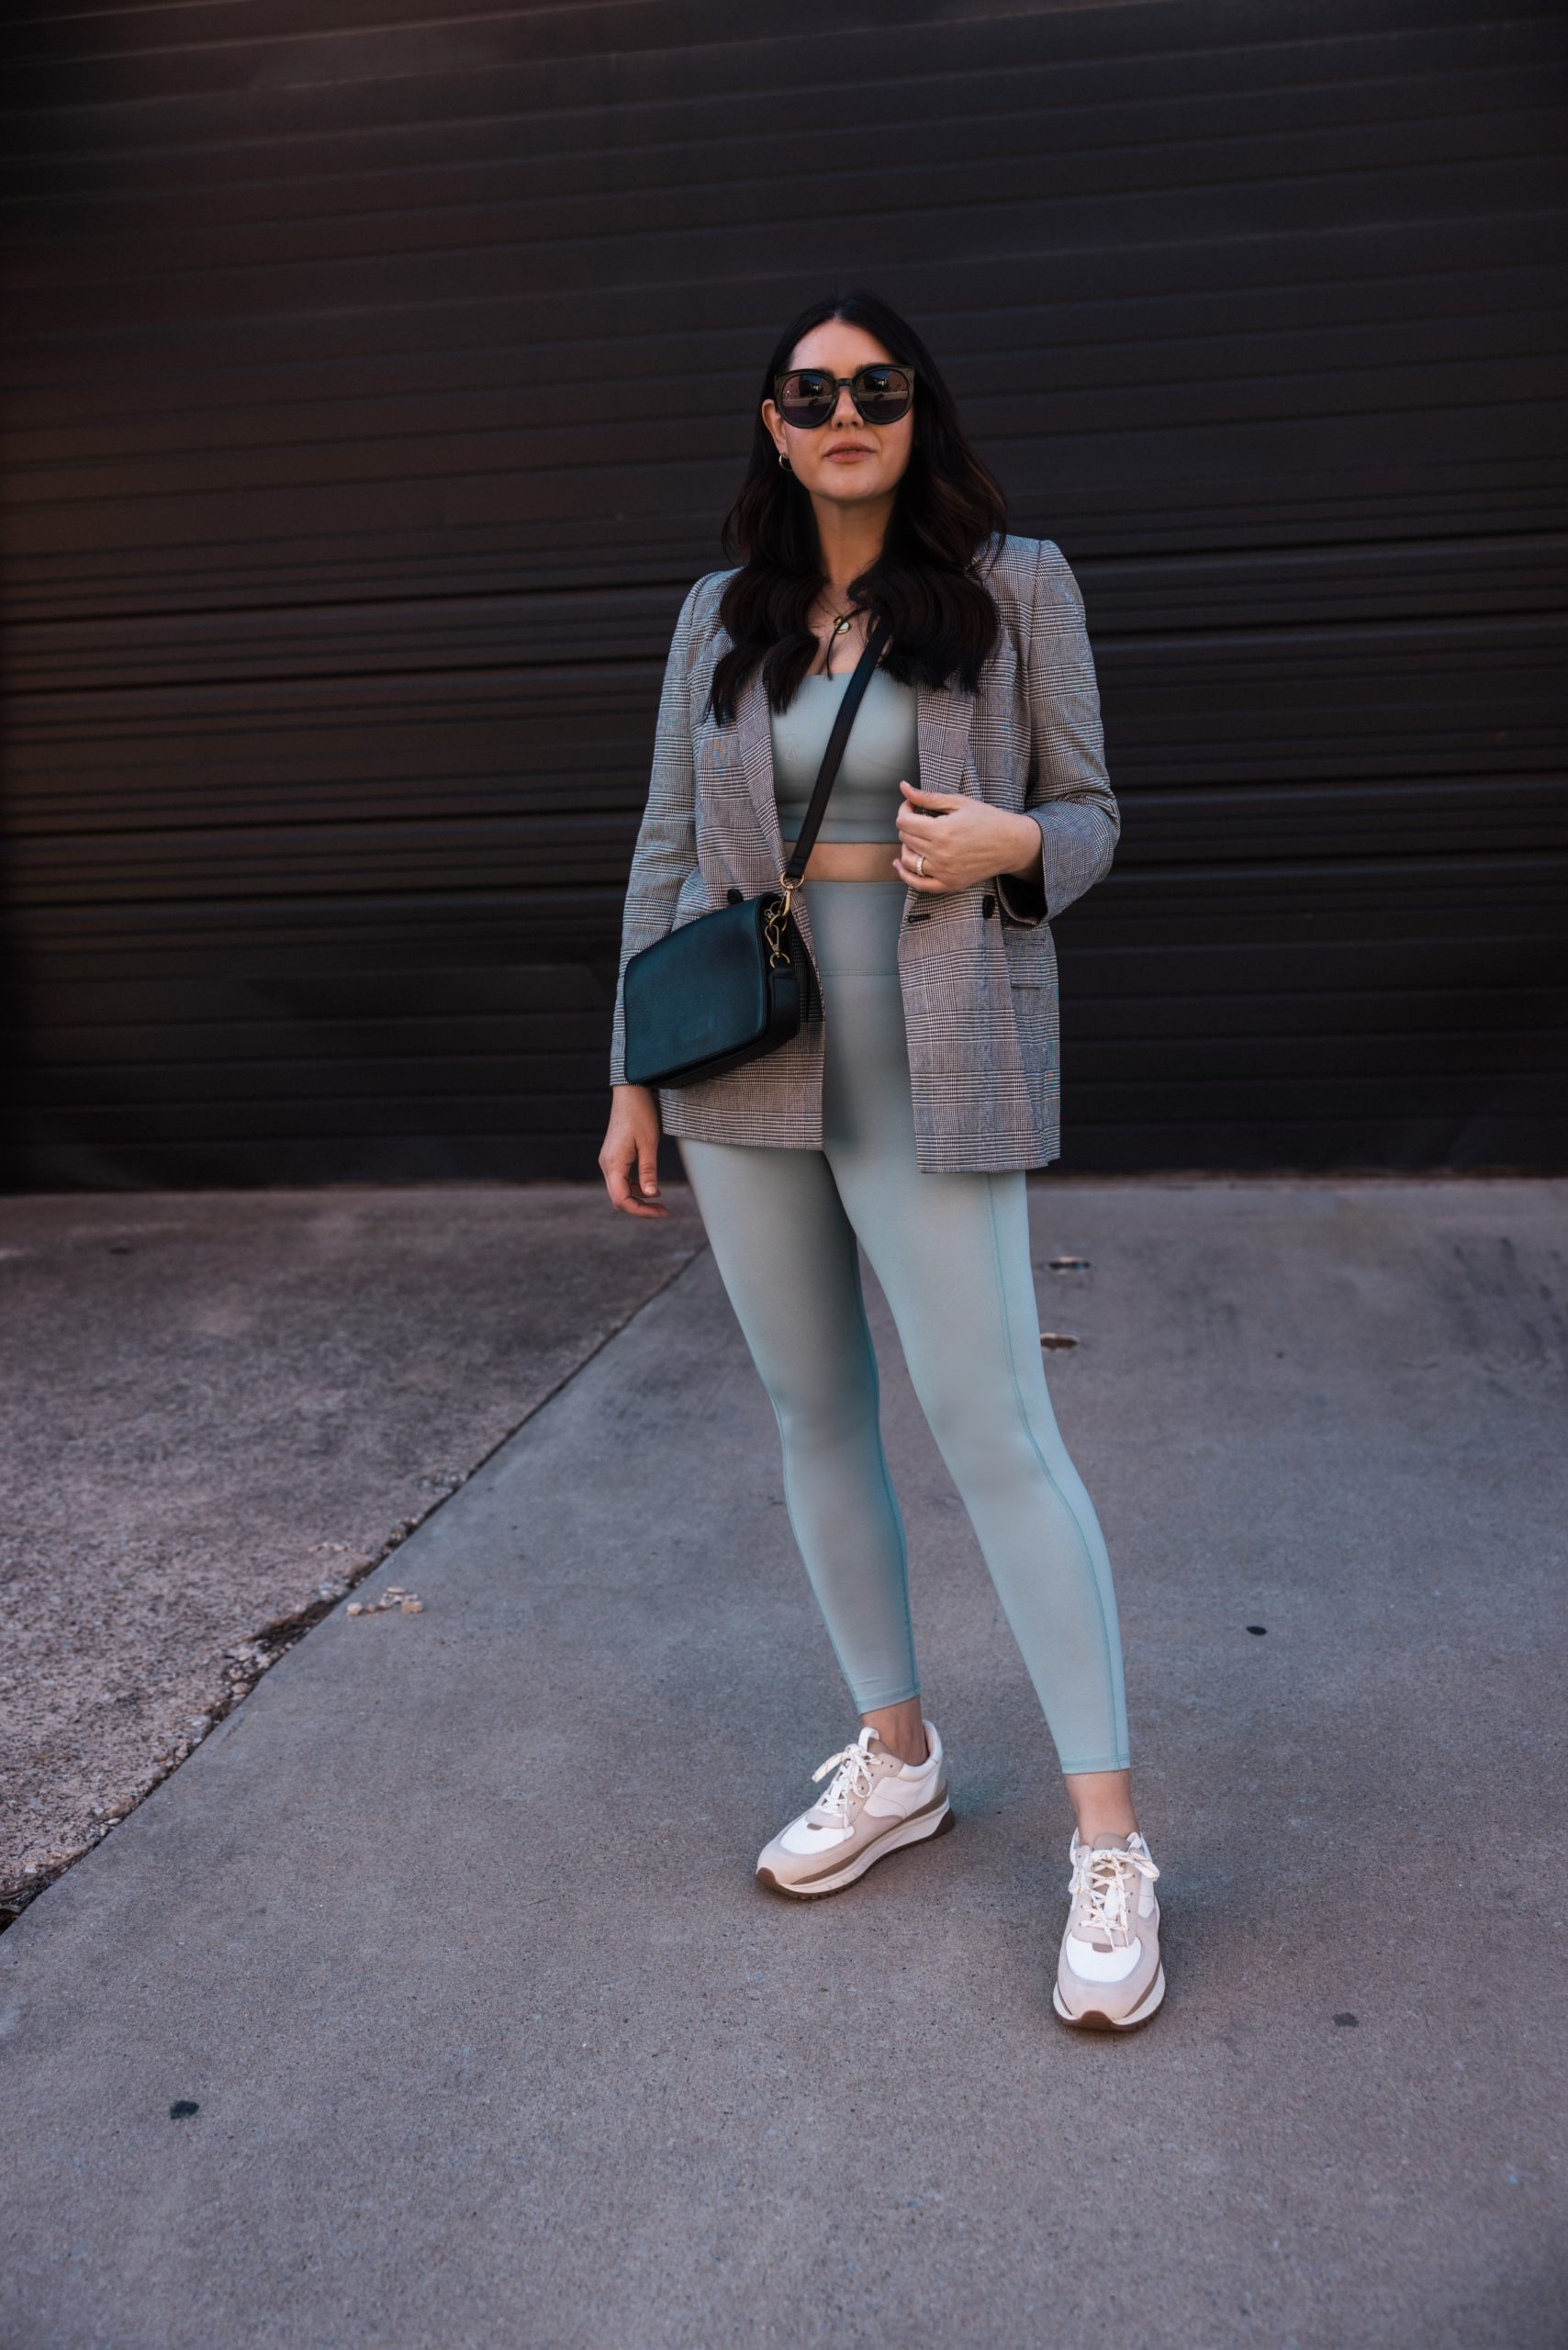 https://www.kendieveryday.com/wp-content/uploads/2022/02/Kendi-Everyday-wearing-MWL-leggings-and-sports-bra-and-Madewell-Blazer-03-scaled.jpg